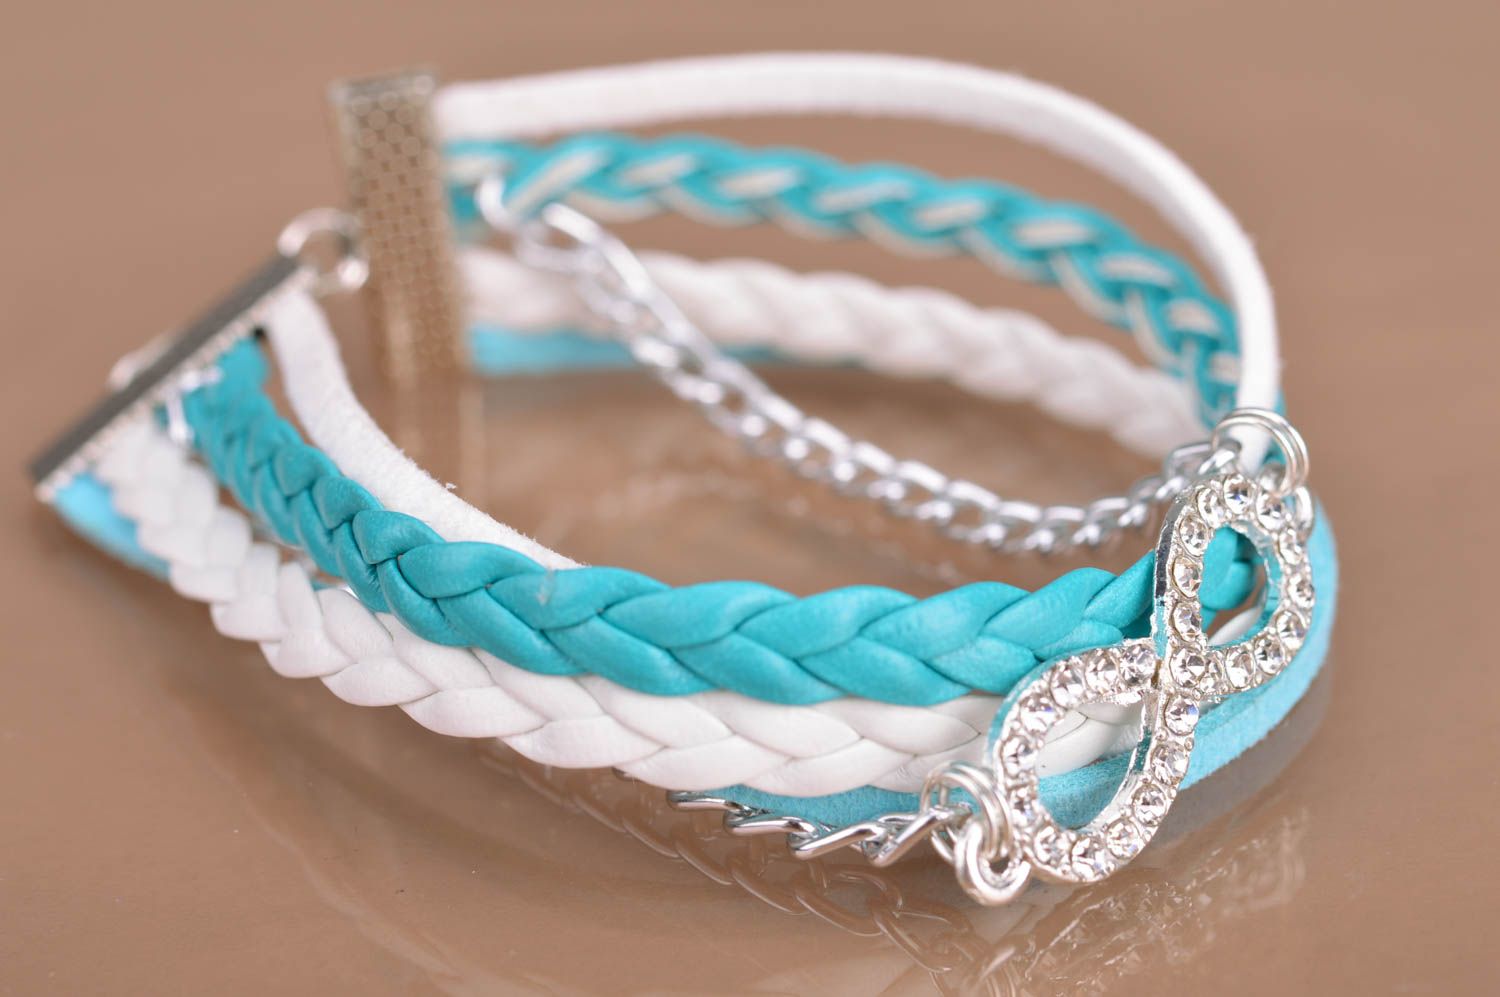 Handmade multi row blue and white suede cord wrist bracelet with metal insert photo 2